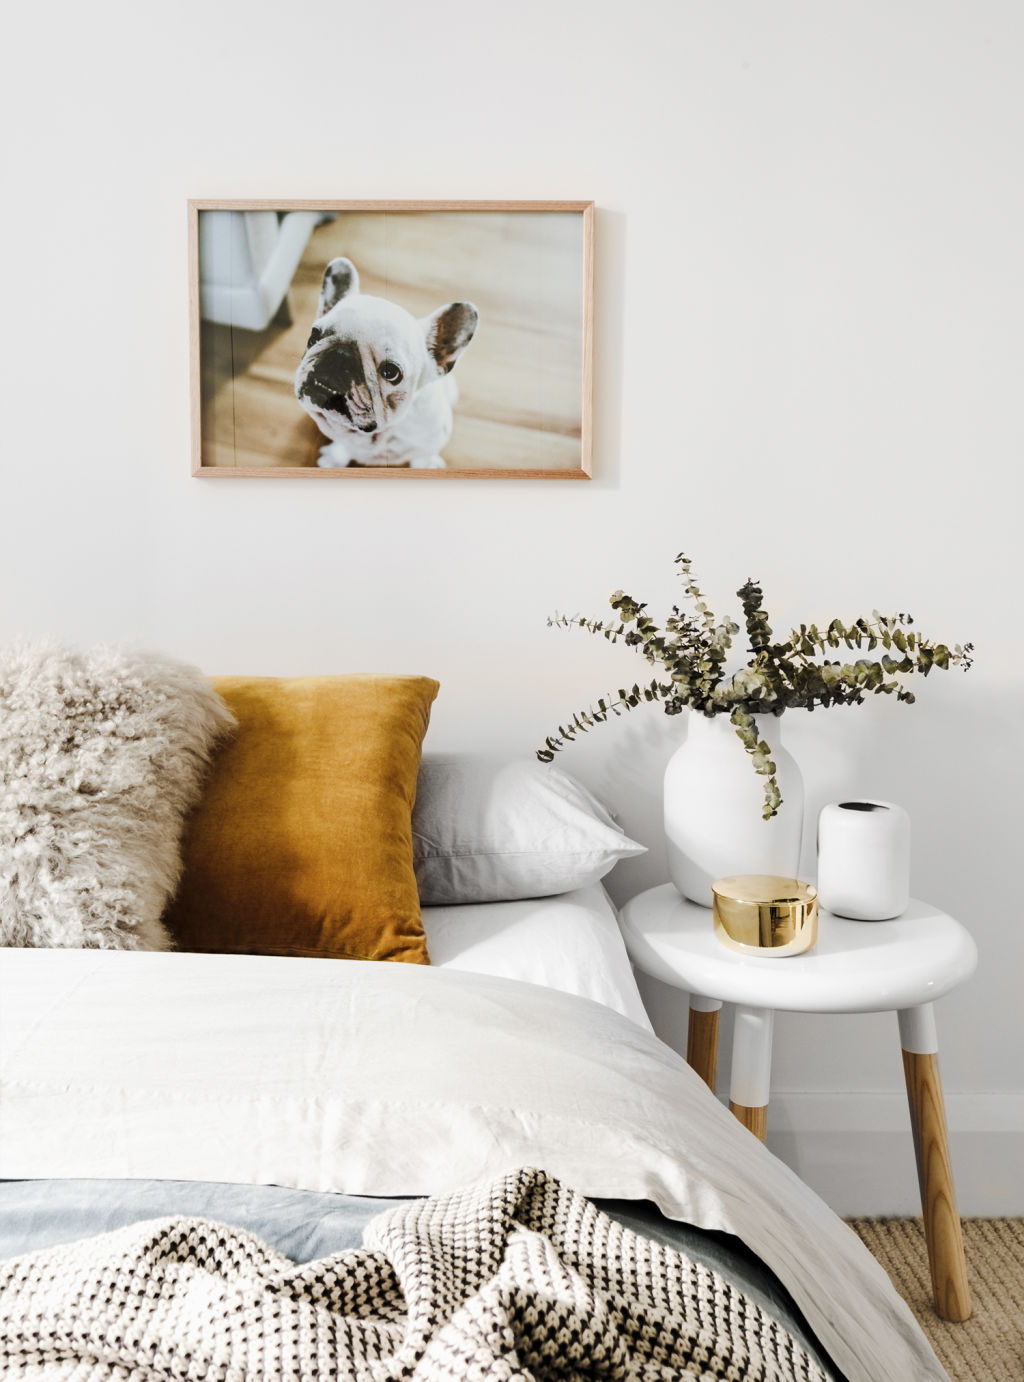 The art of choosing, framing and hanging art in your home